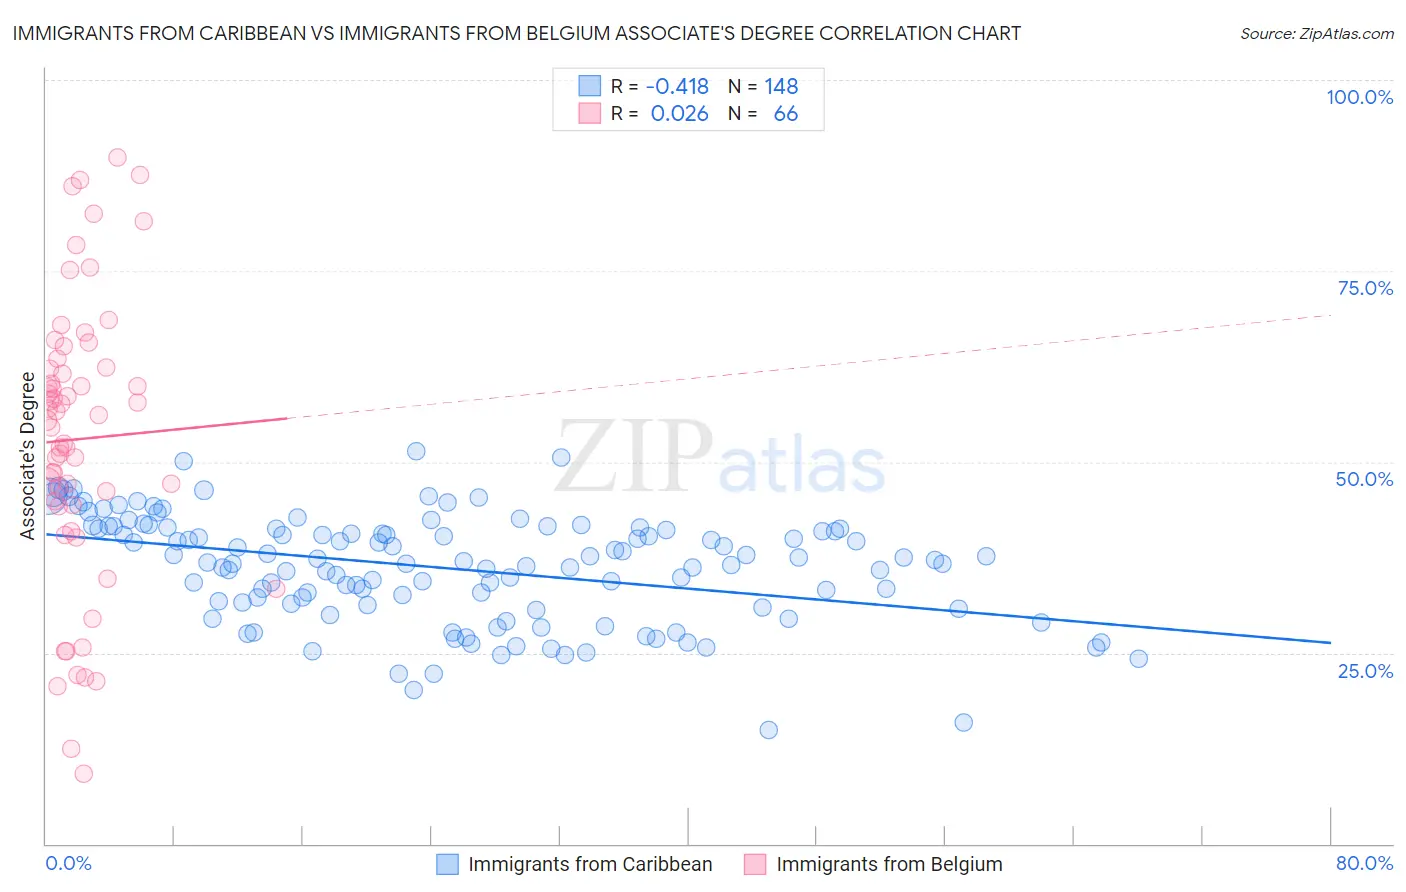 Immigrants from Caribbean vs Immigrants from Belgium Associate's Degree